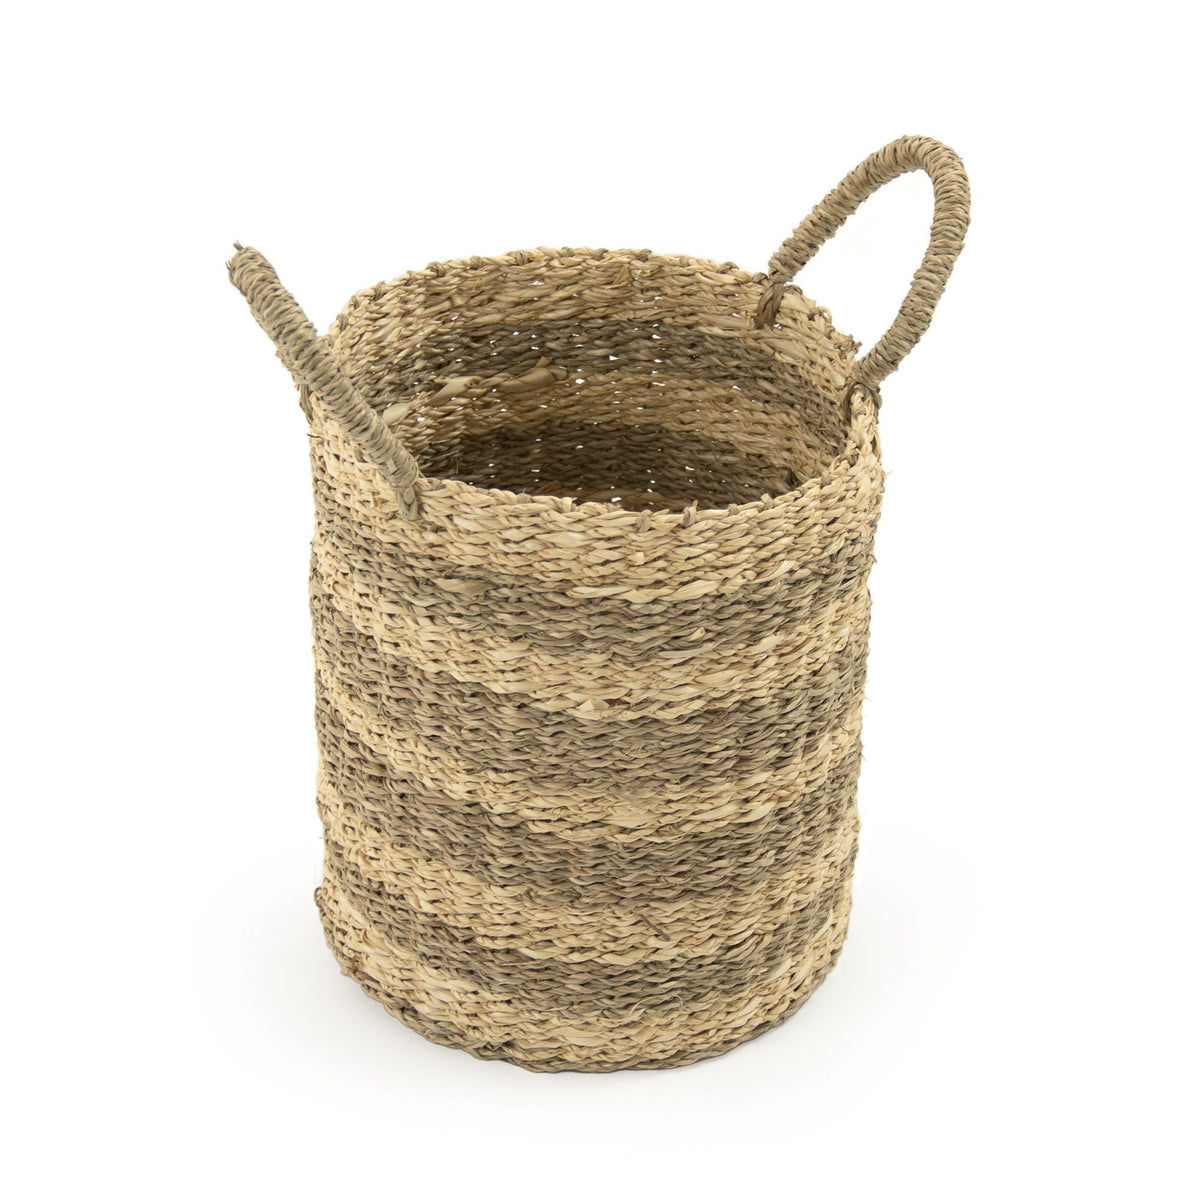 Woven Wire Basket by Zentique